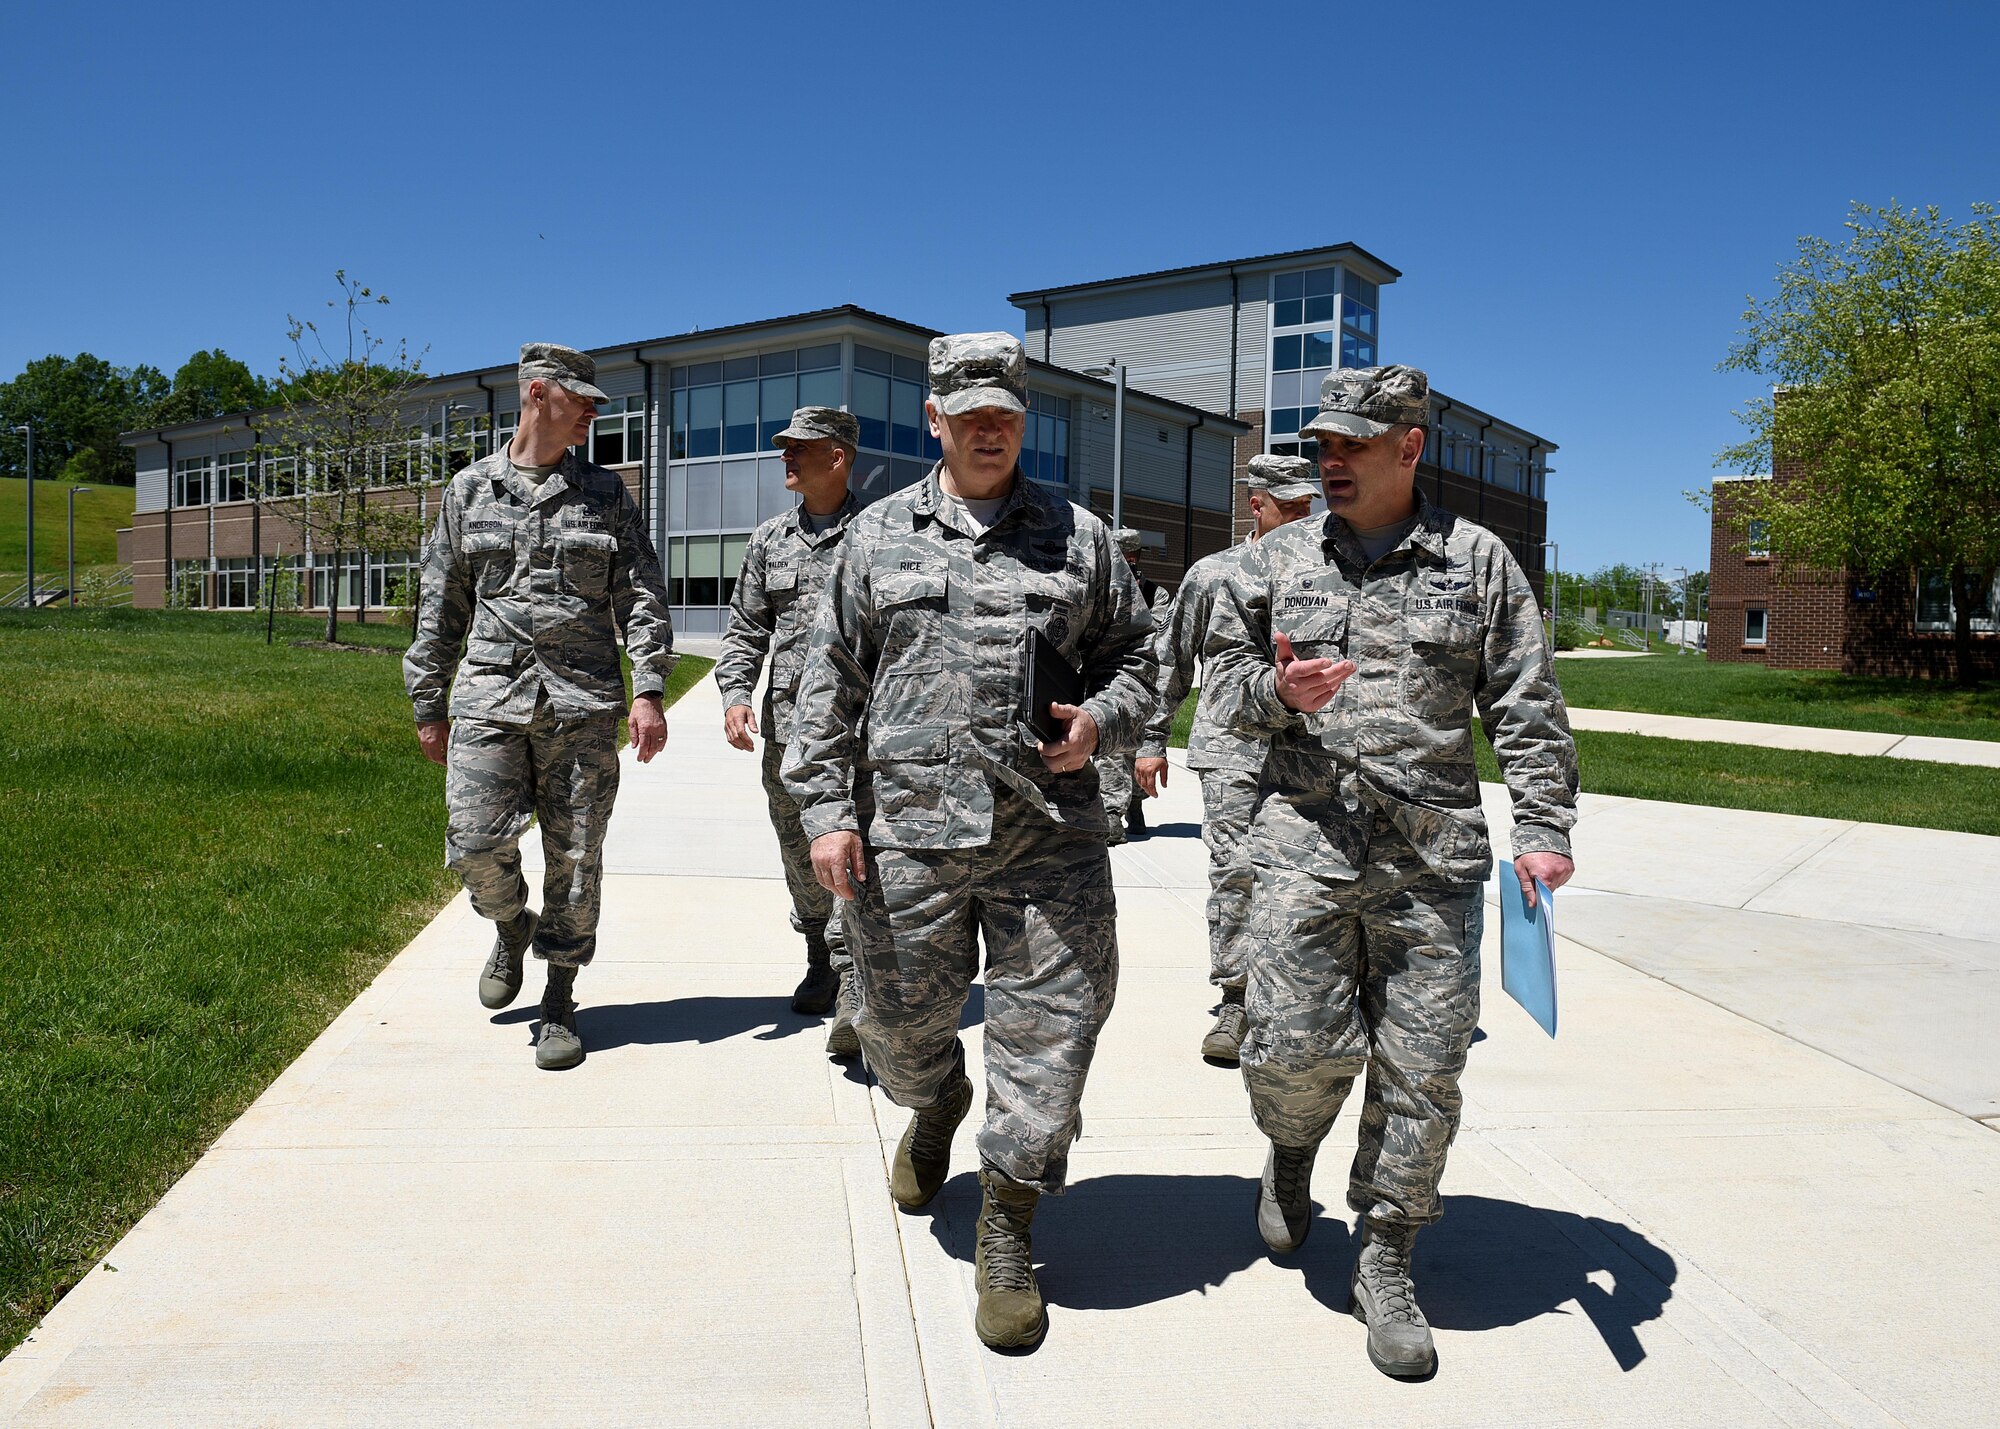 The Director of the Air National Guard, Lt. Gen. L. Scott Rice, and the Air National Guard Command Chief, Chief Master Sgt. Ron Anderson, visit the I.G. Brown Training and Education Center, May 2, 2017, in east Tennessee. General Rice and Chief Anderson spoke with the National Guard’s Joint Enlisted Advisory Council (JEAC), or about 90 senior enlisted National Guard Soldiers and Airmen from the states and territories here this week. They also toured TEC’s campus, meet professional military education students and attended the afternoon retreat ceremony with students and staff. (U.S. Air National Guard photo by Master Sgt. Mike R. Smith)